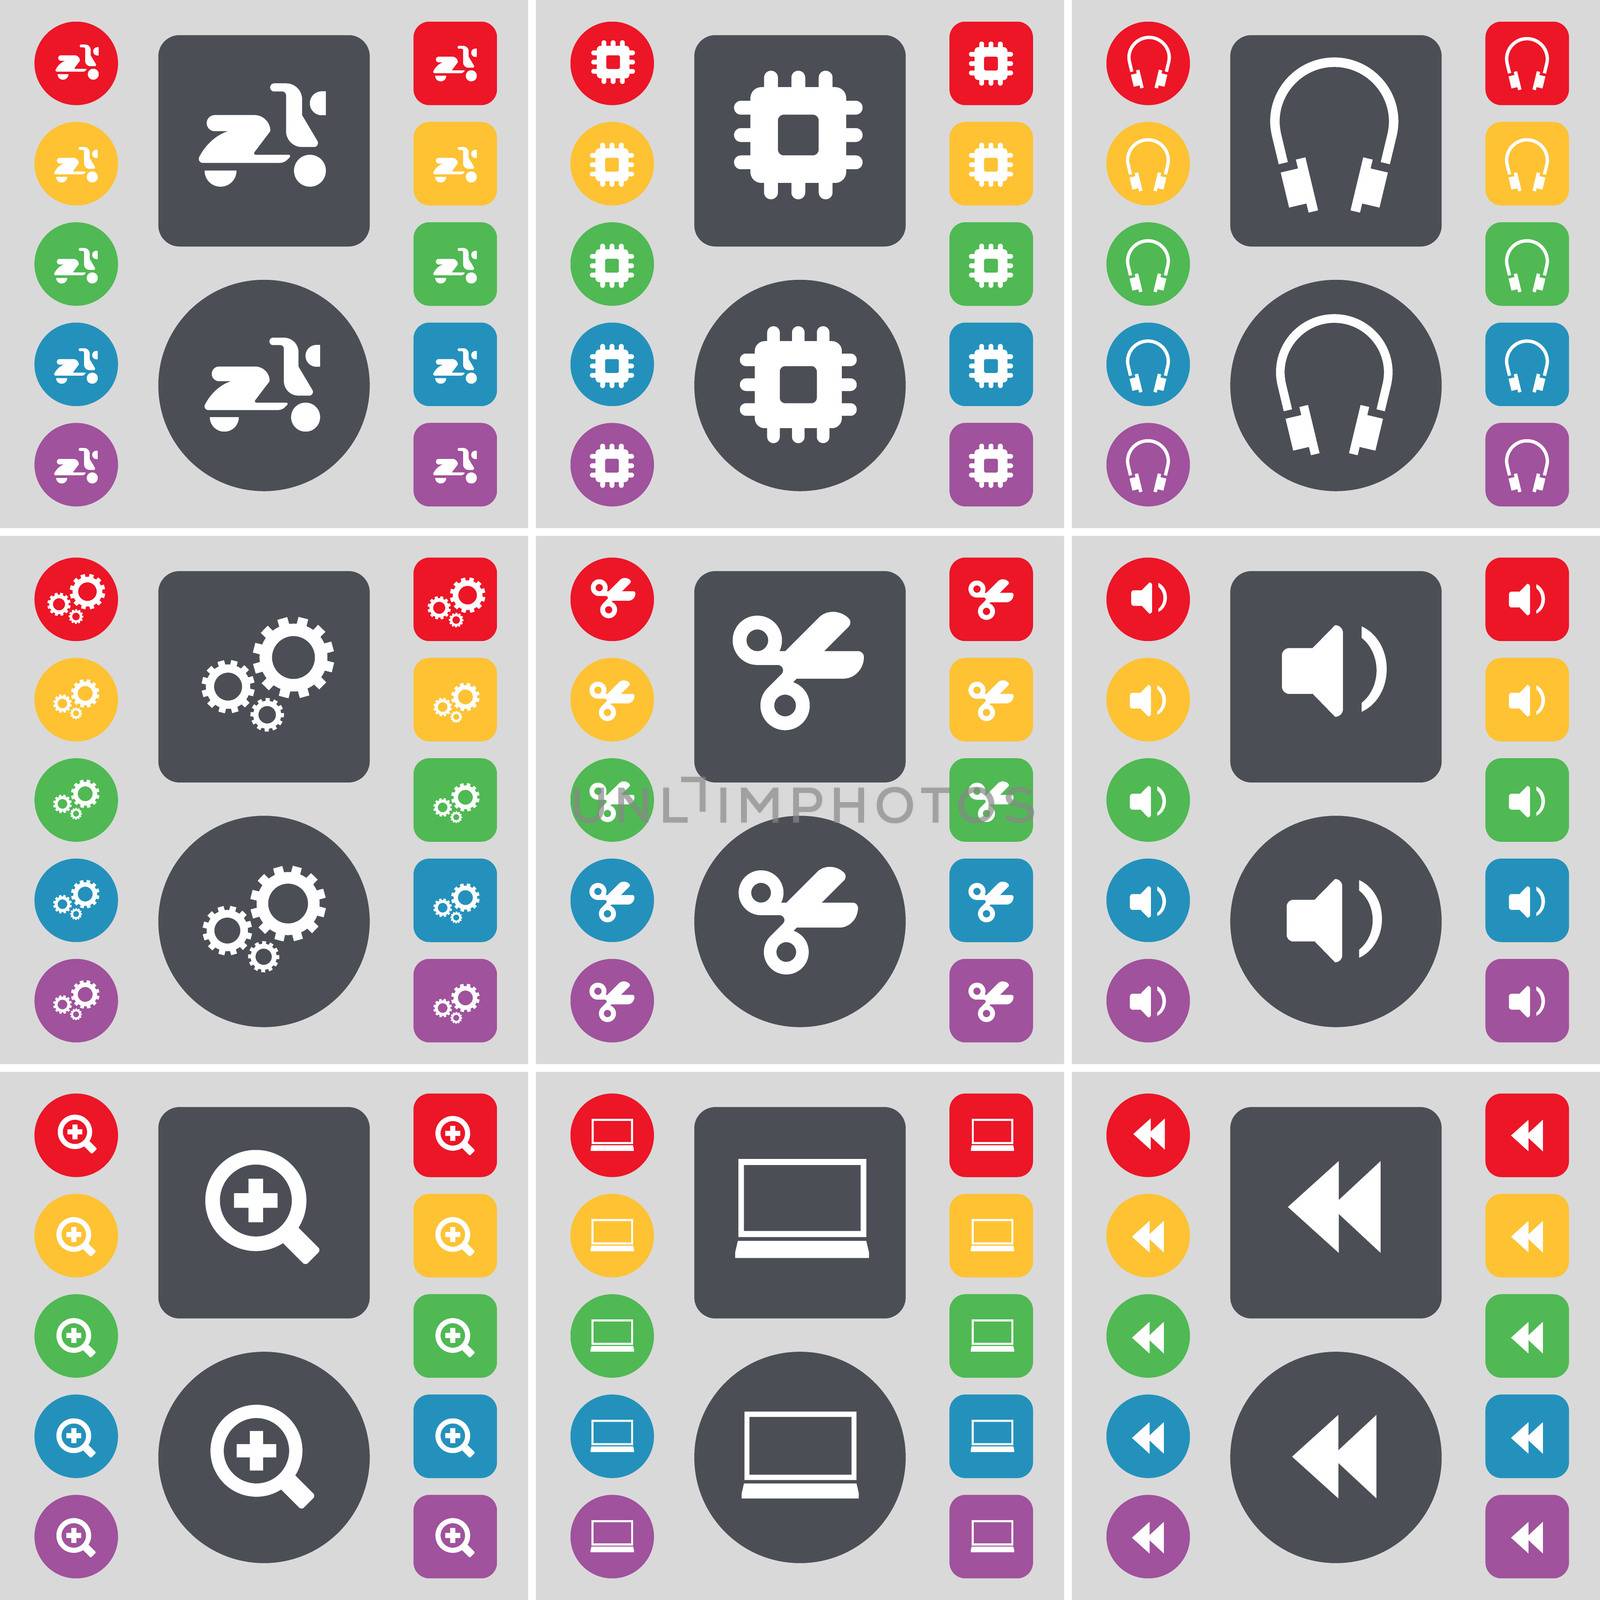 Scooter, Processor, Headphones, Gears, Scissors, Sound, Plus, Laptop, Rewind icon symbol. A large set of flat, colored buttons for your design. illustration